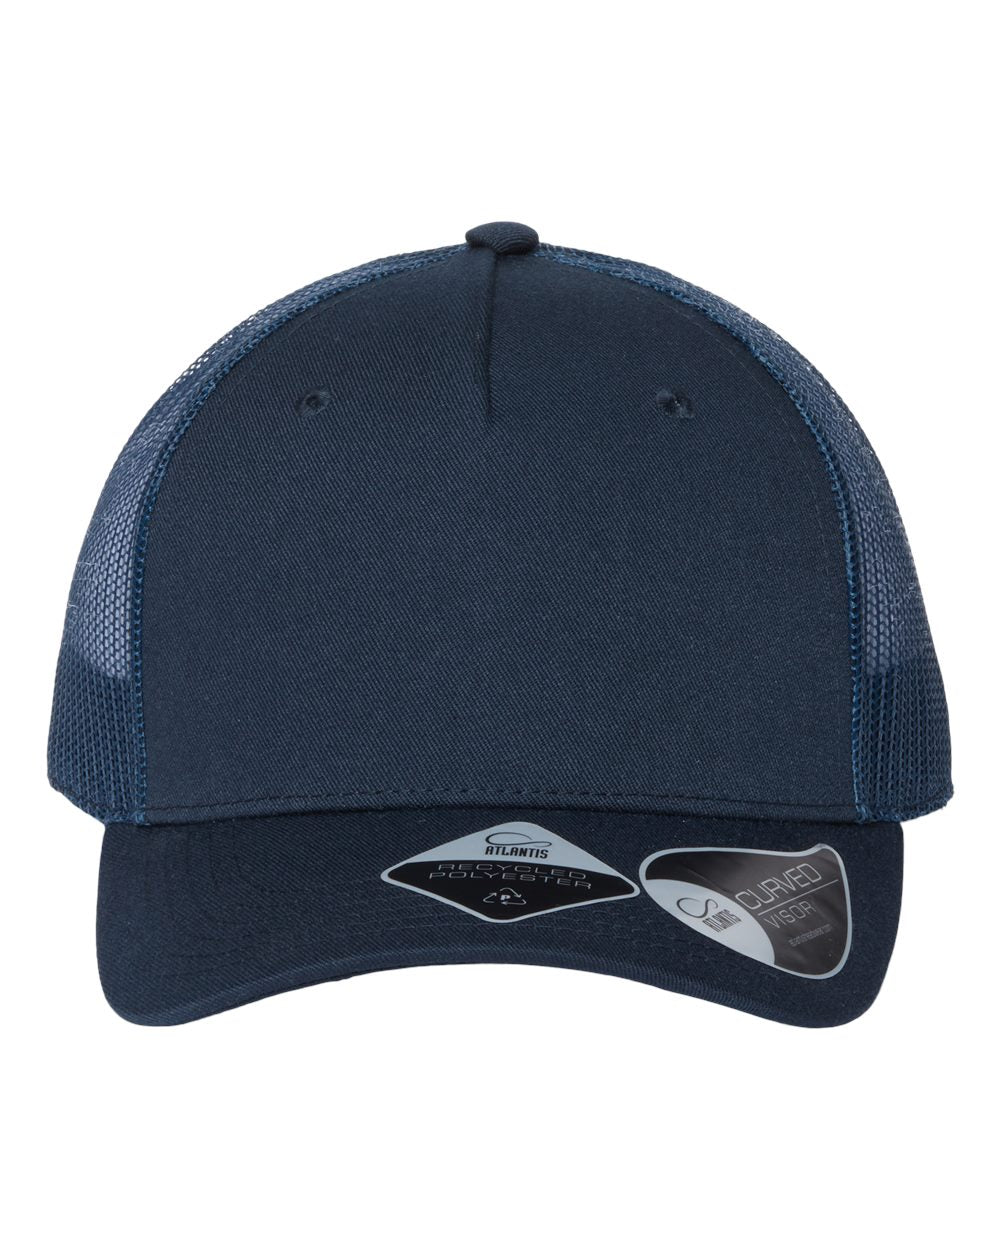 Customizable recycled polyester Atlantis truck hat in navy